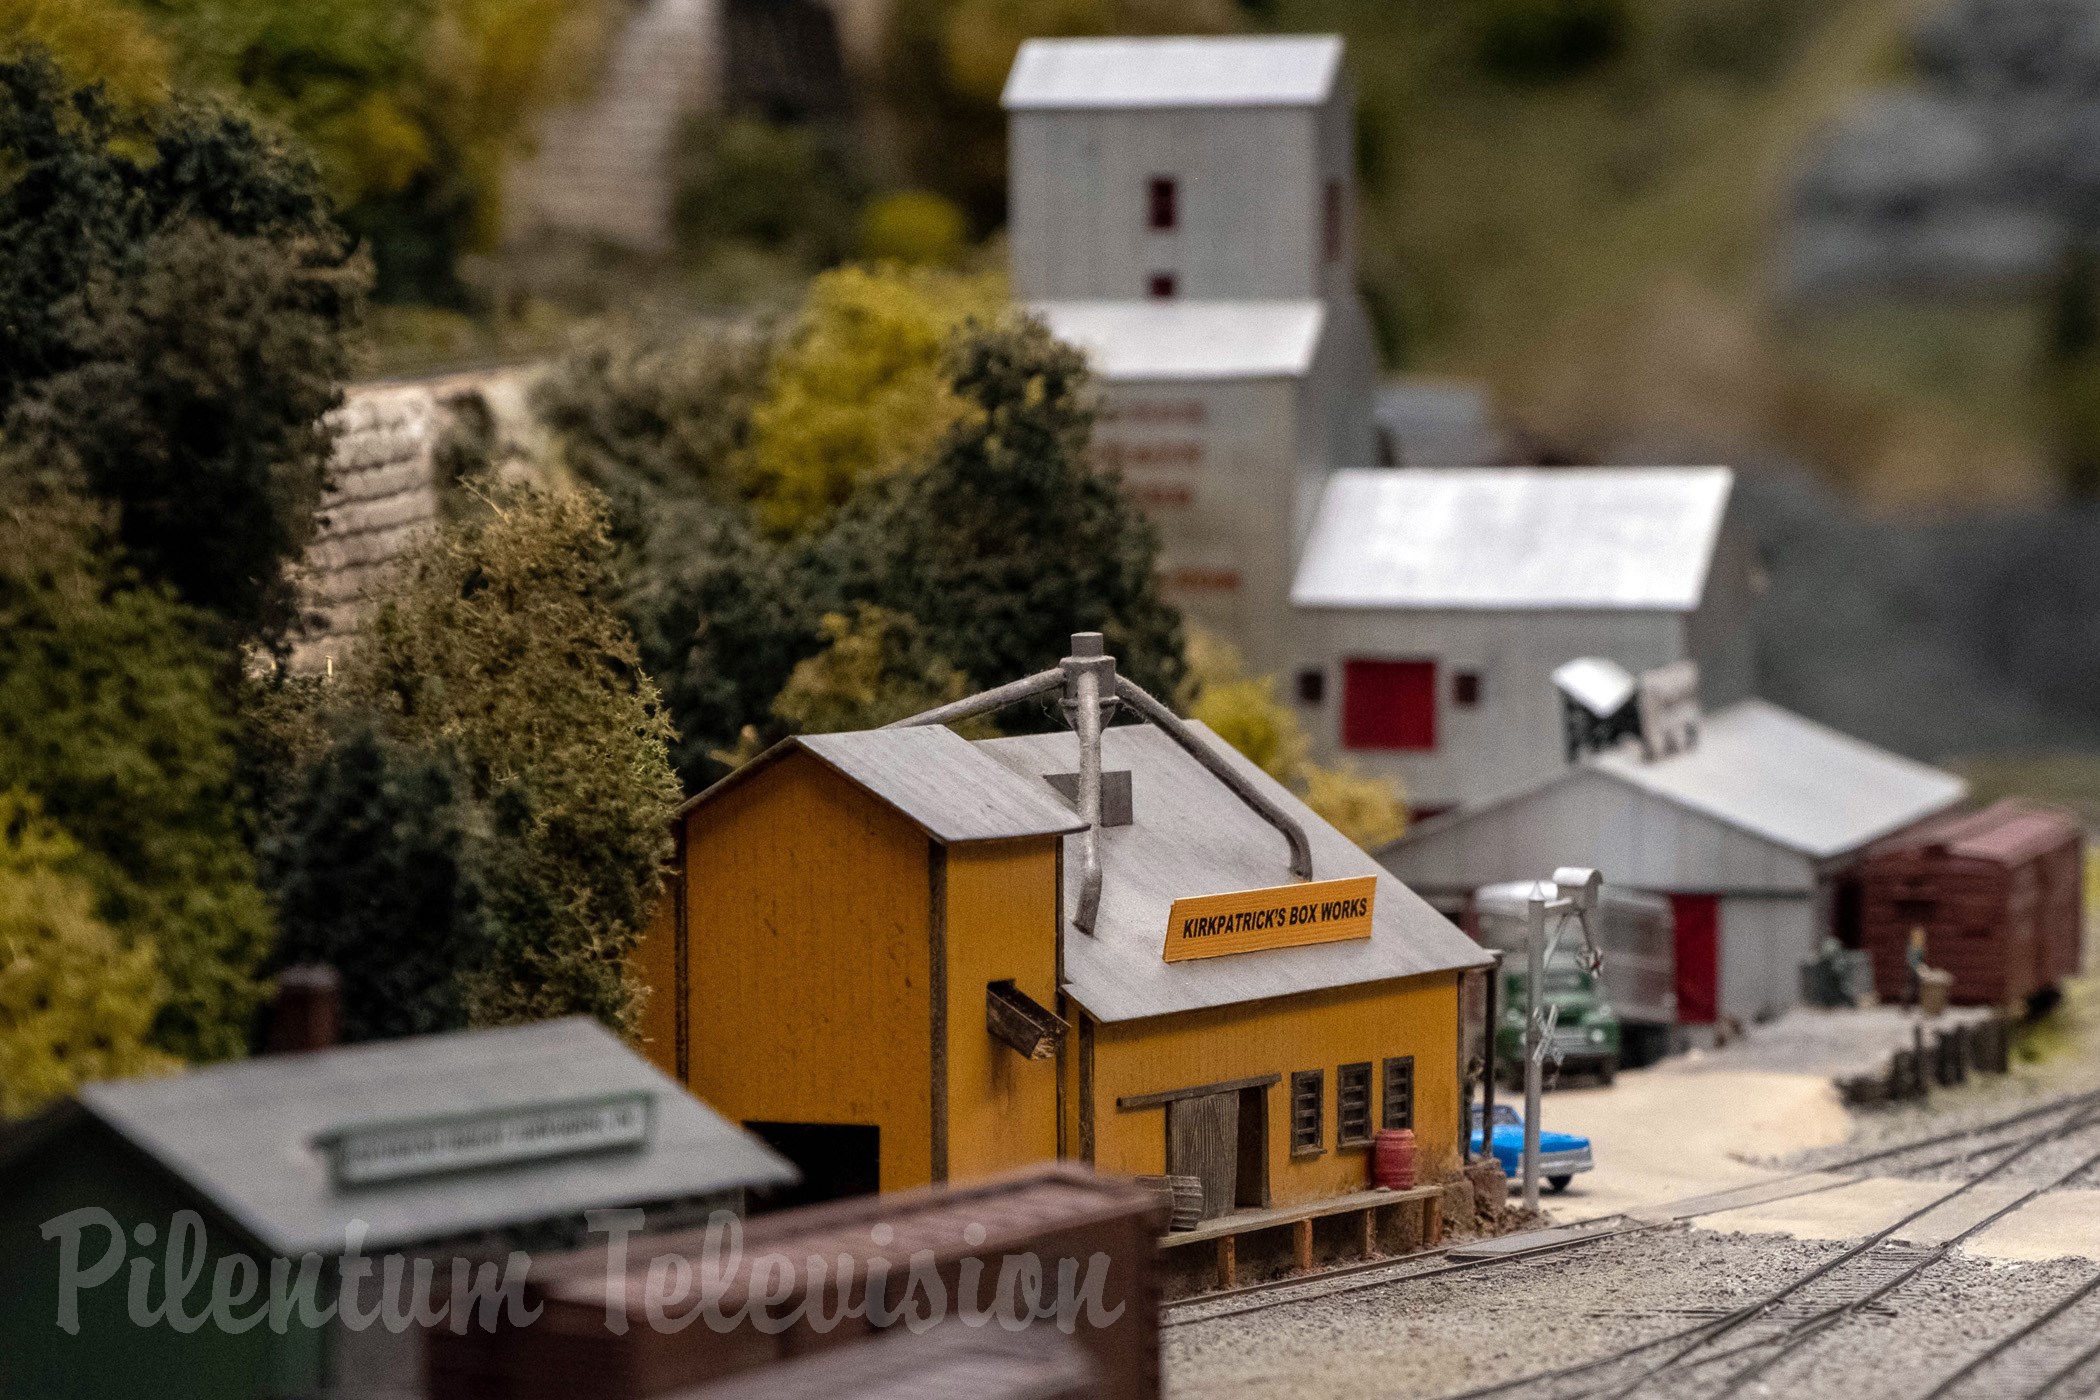 One of the most Picturesque and Largest Model Railroad Layouts in the United States - Cab Ride Layout Tour